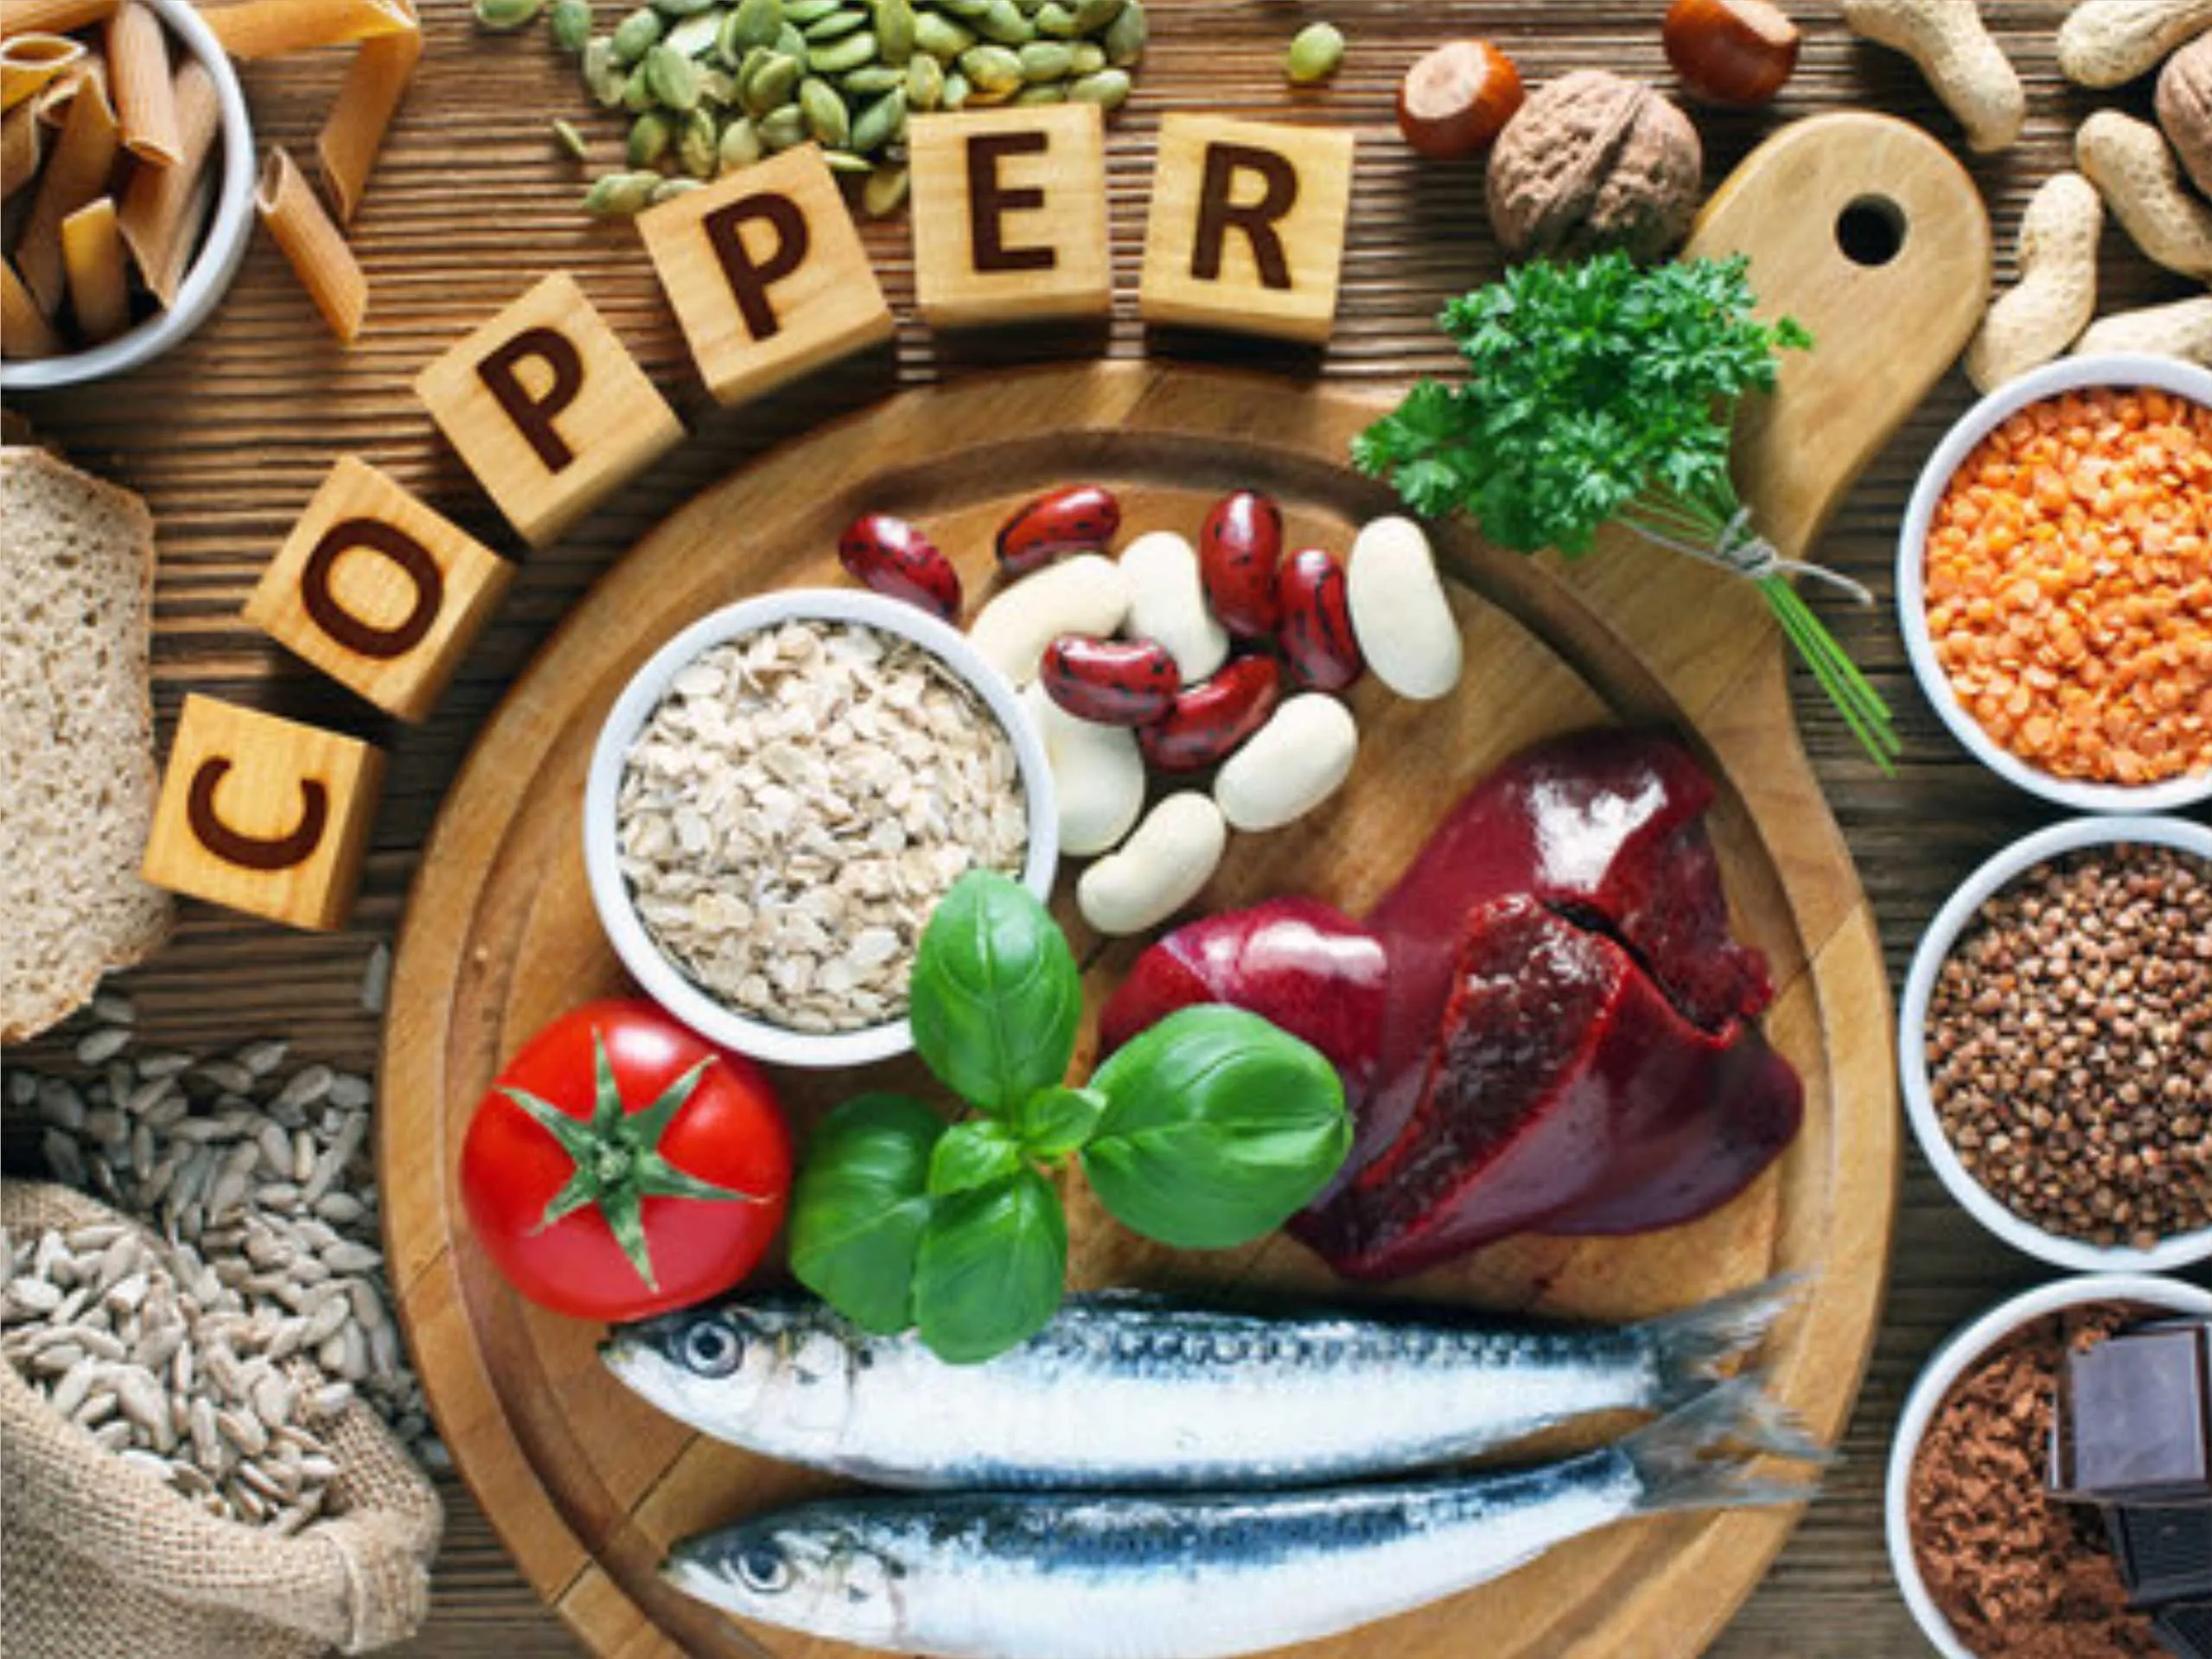 Copper Rich food items